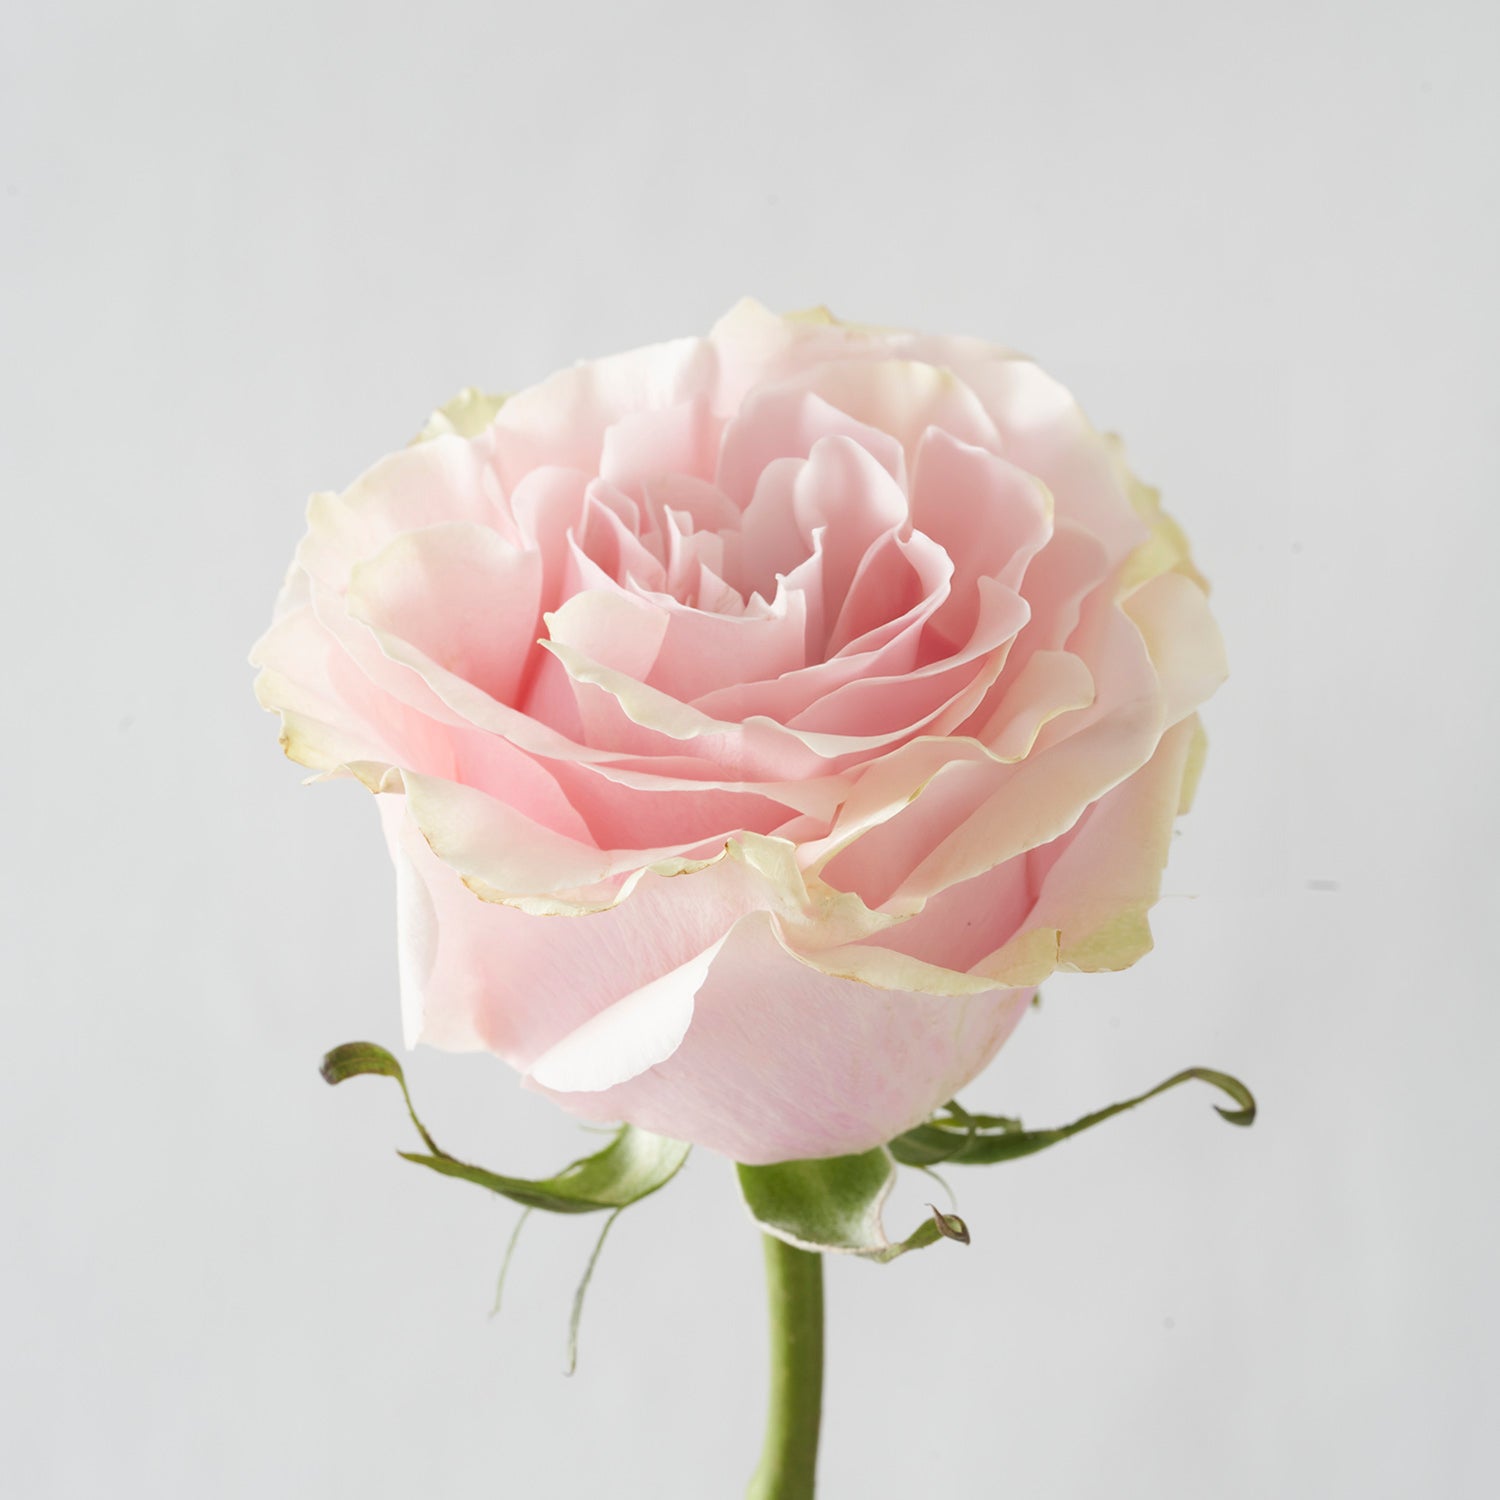 Closeup of one pale pink Mondial rose on white background.